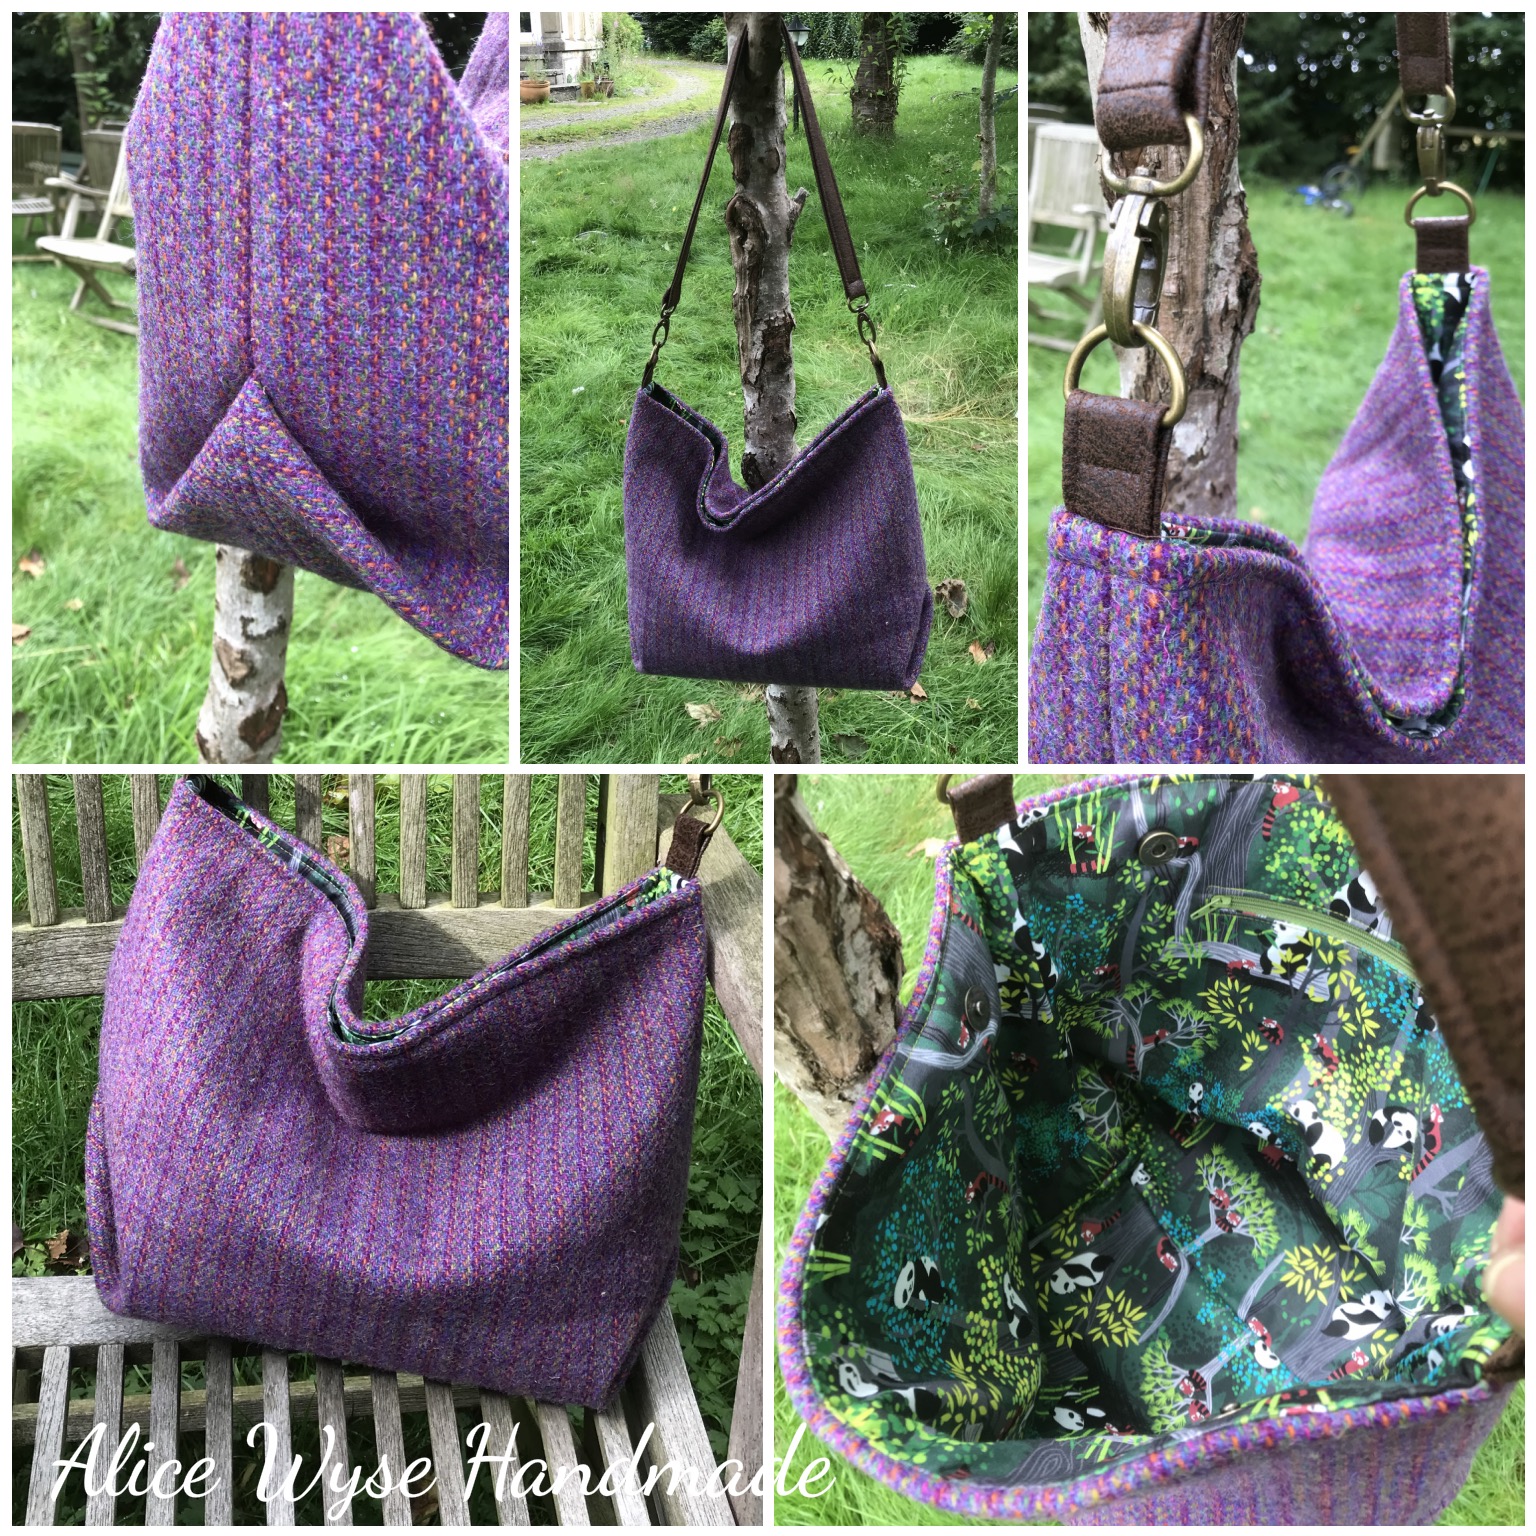 The Cwtsh Bag from Sewing Patterns by Mrs H, made by Alice Ferguson